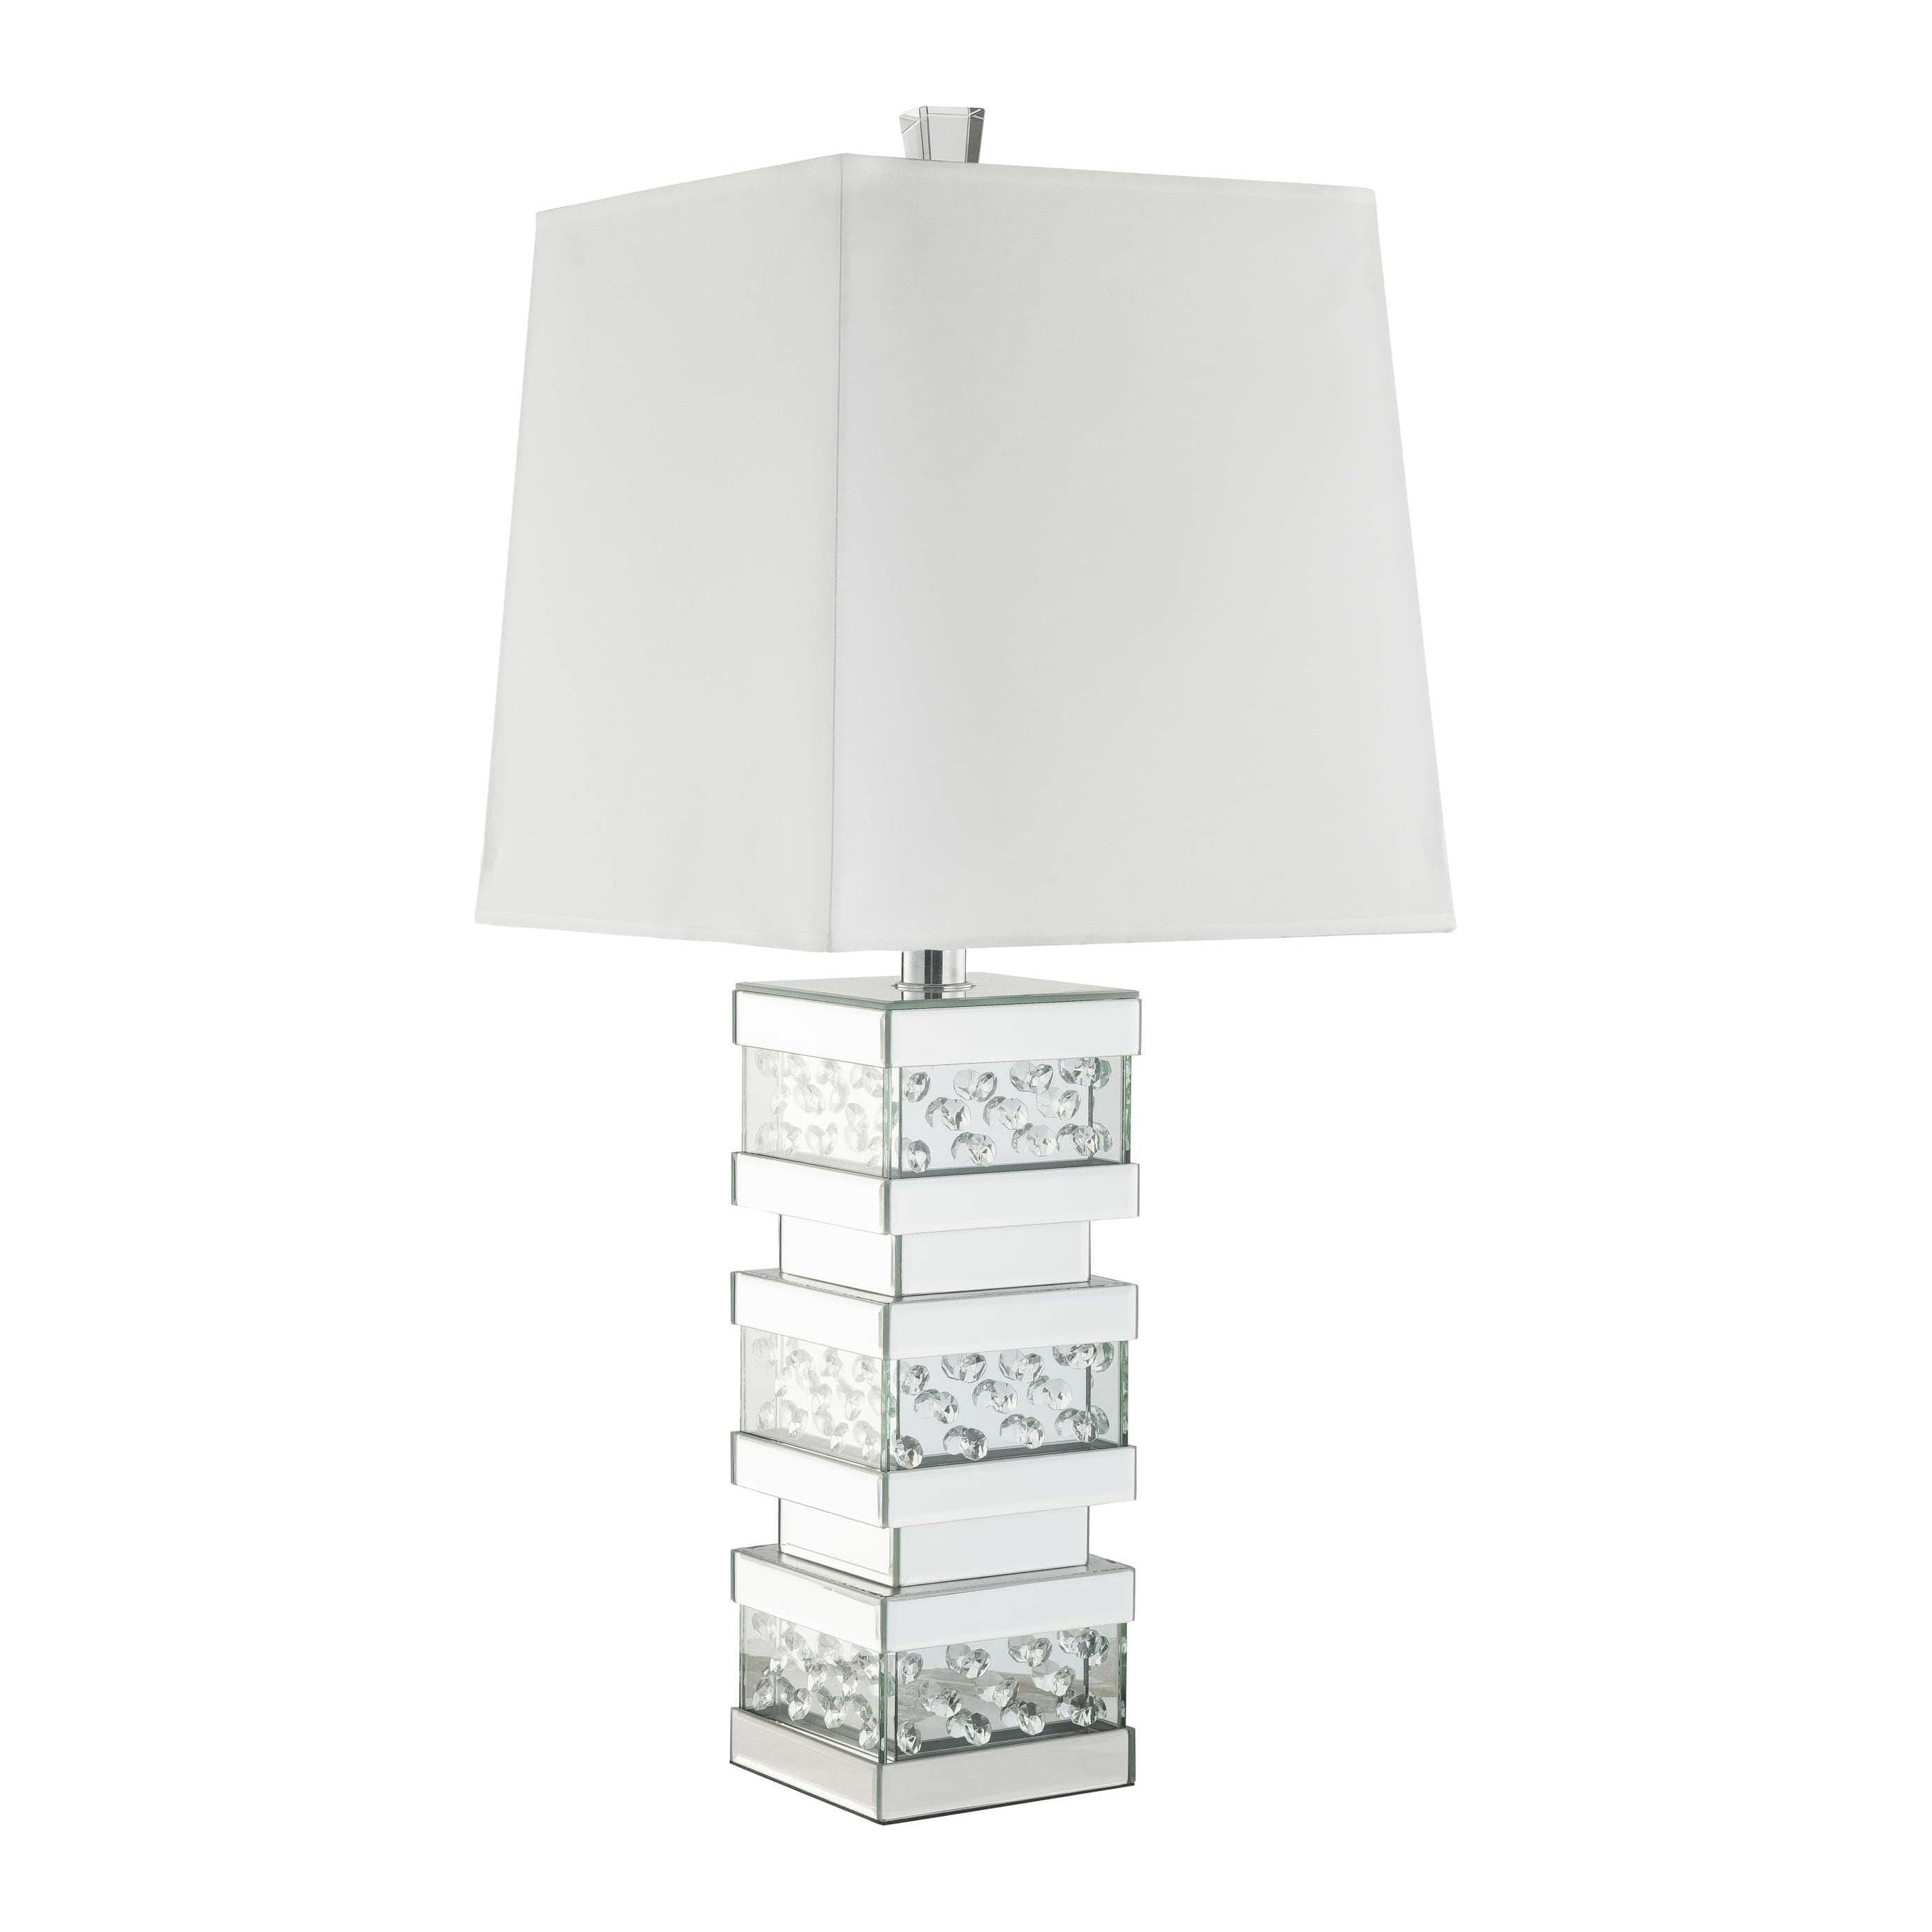 Benzara Contemporary Square Table Lamp With Pedestal Mirrored Base, White And Clear By Benzara Table Lamps BM207534